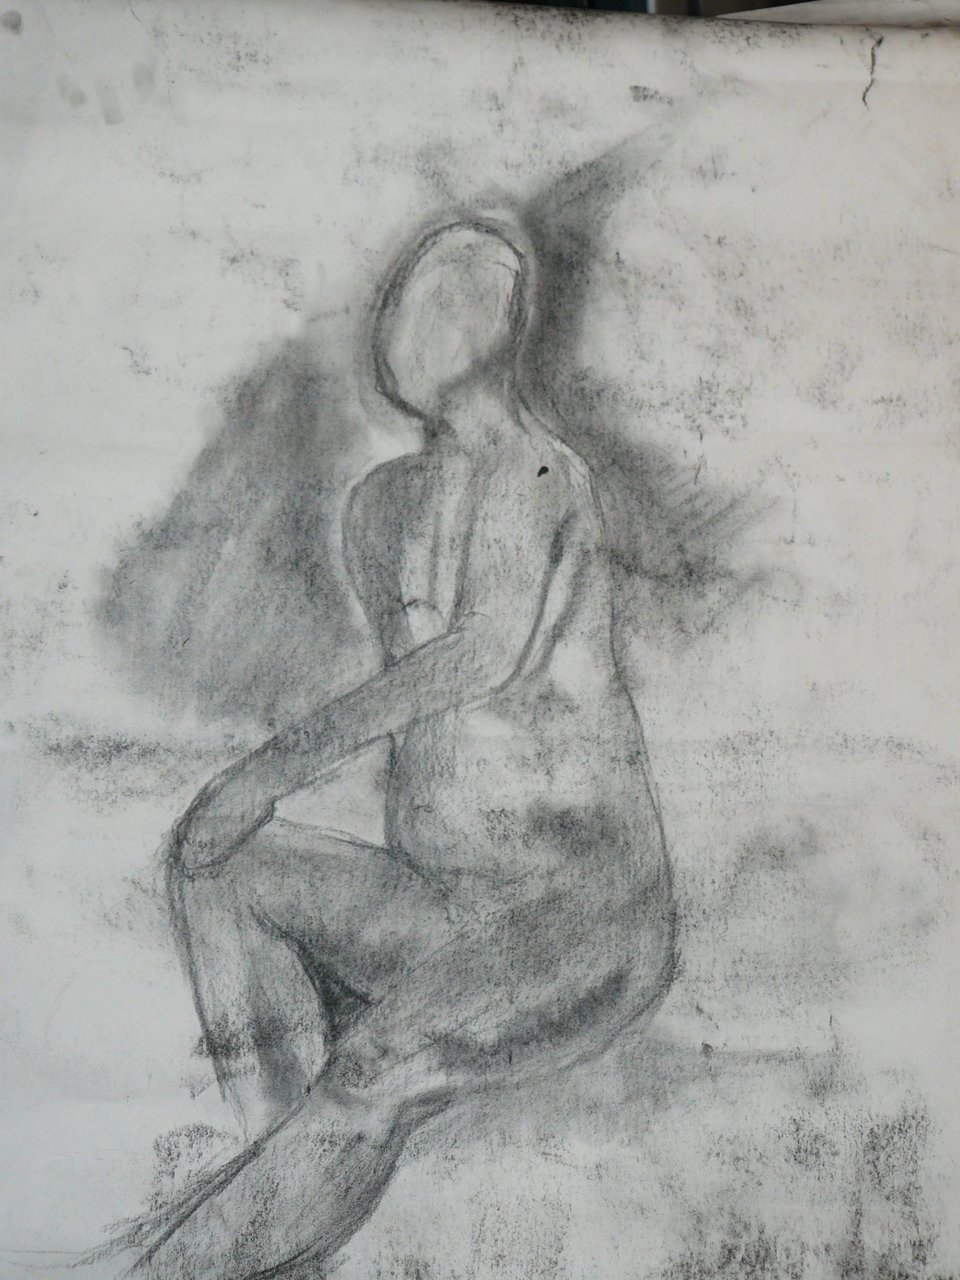 Nude Study Ex. done in 5 minutes, charcoal.